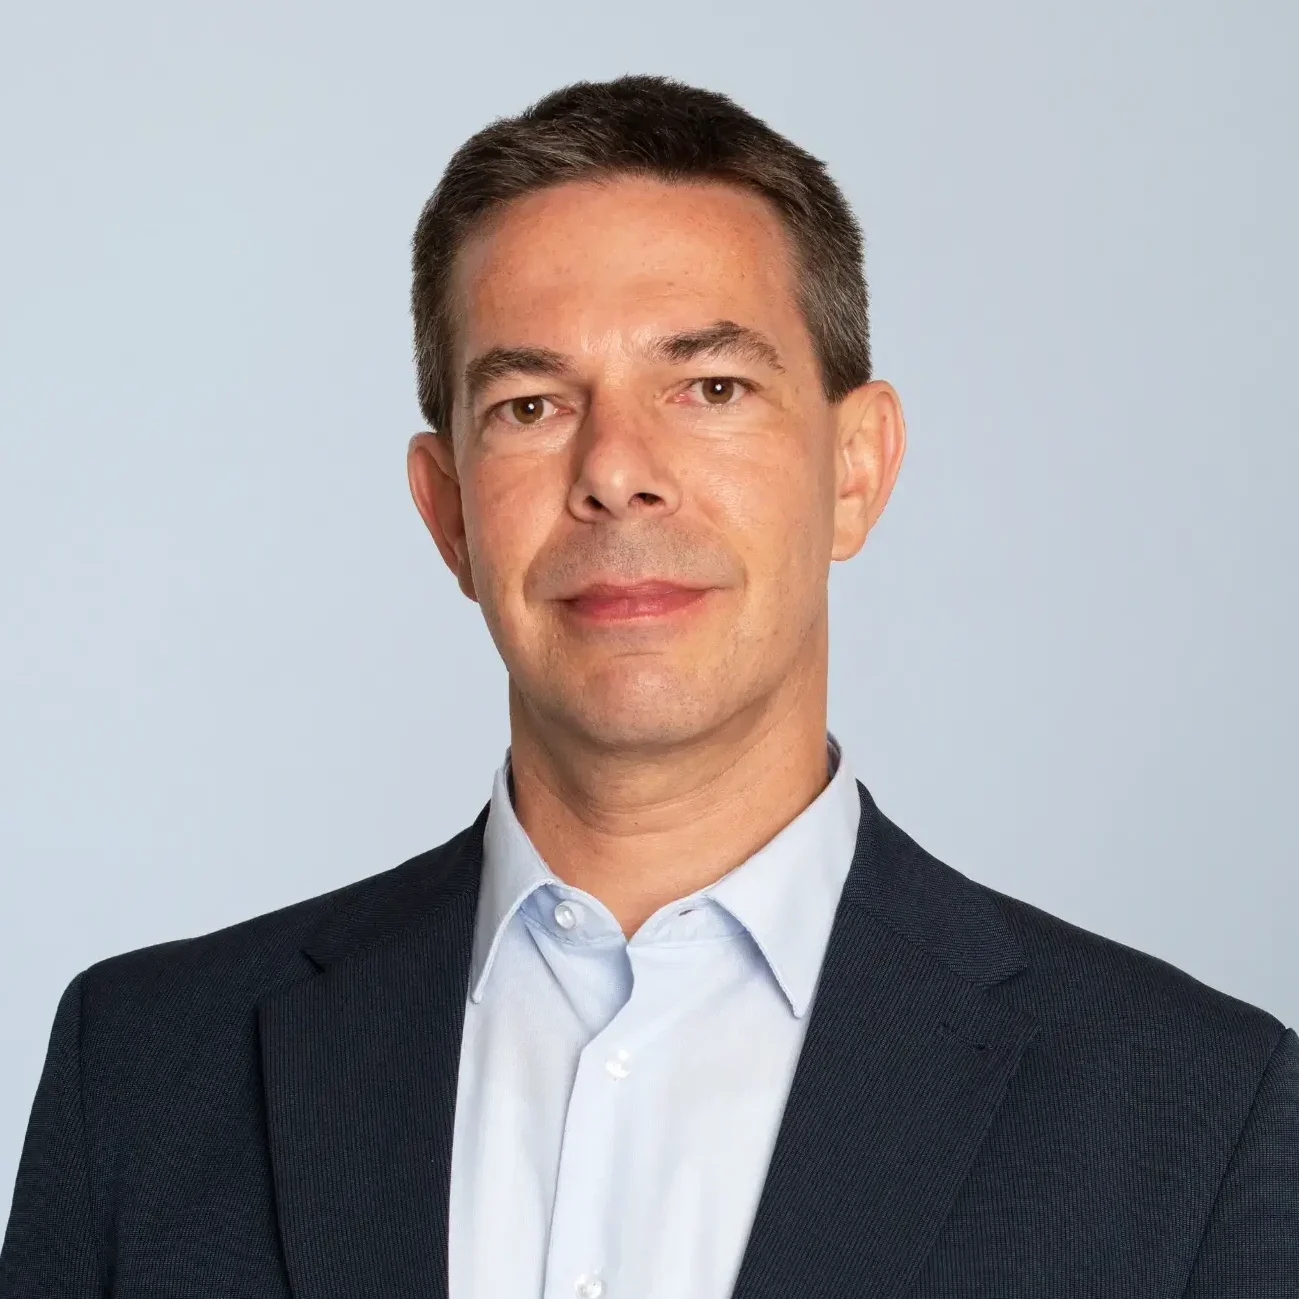 Photo of Karsten Leclerque, our Global Head of Infrastructure & Cloud Services Practice